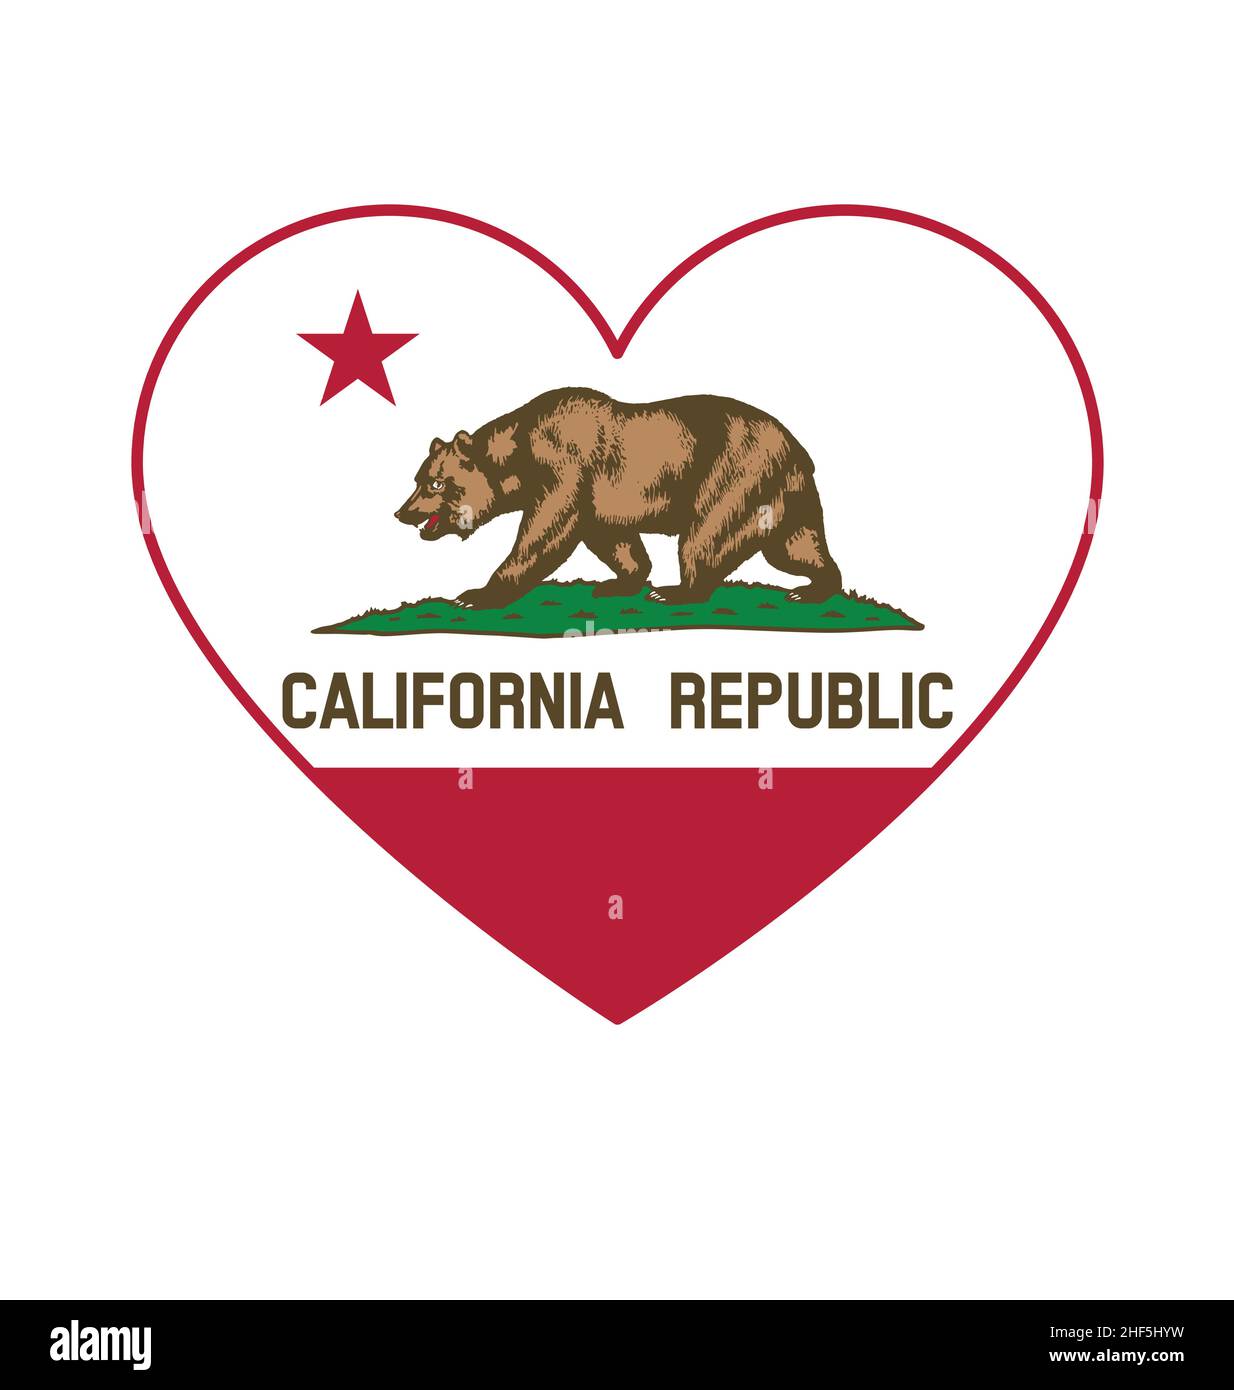 california ca state flag in heart shape symbol logo icon tshirt graphic design vector isolated on white background Stock Vector